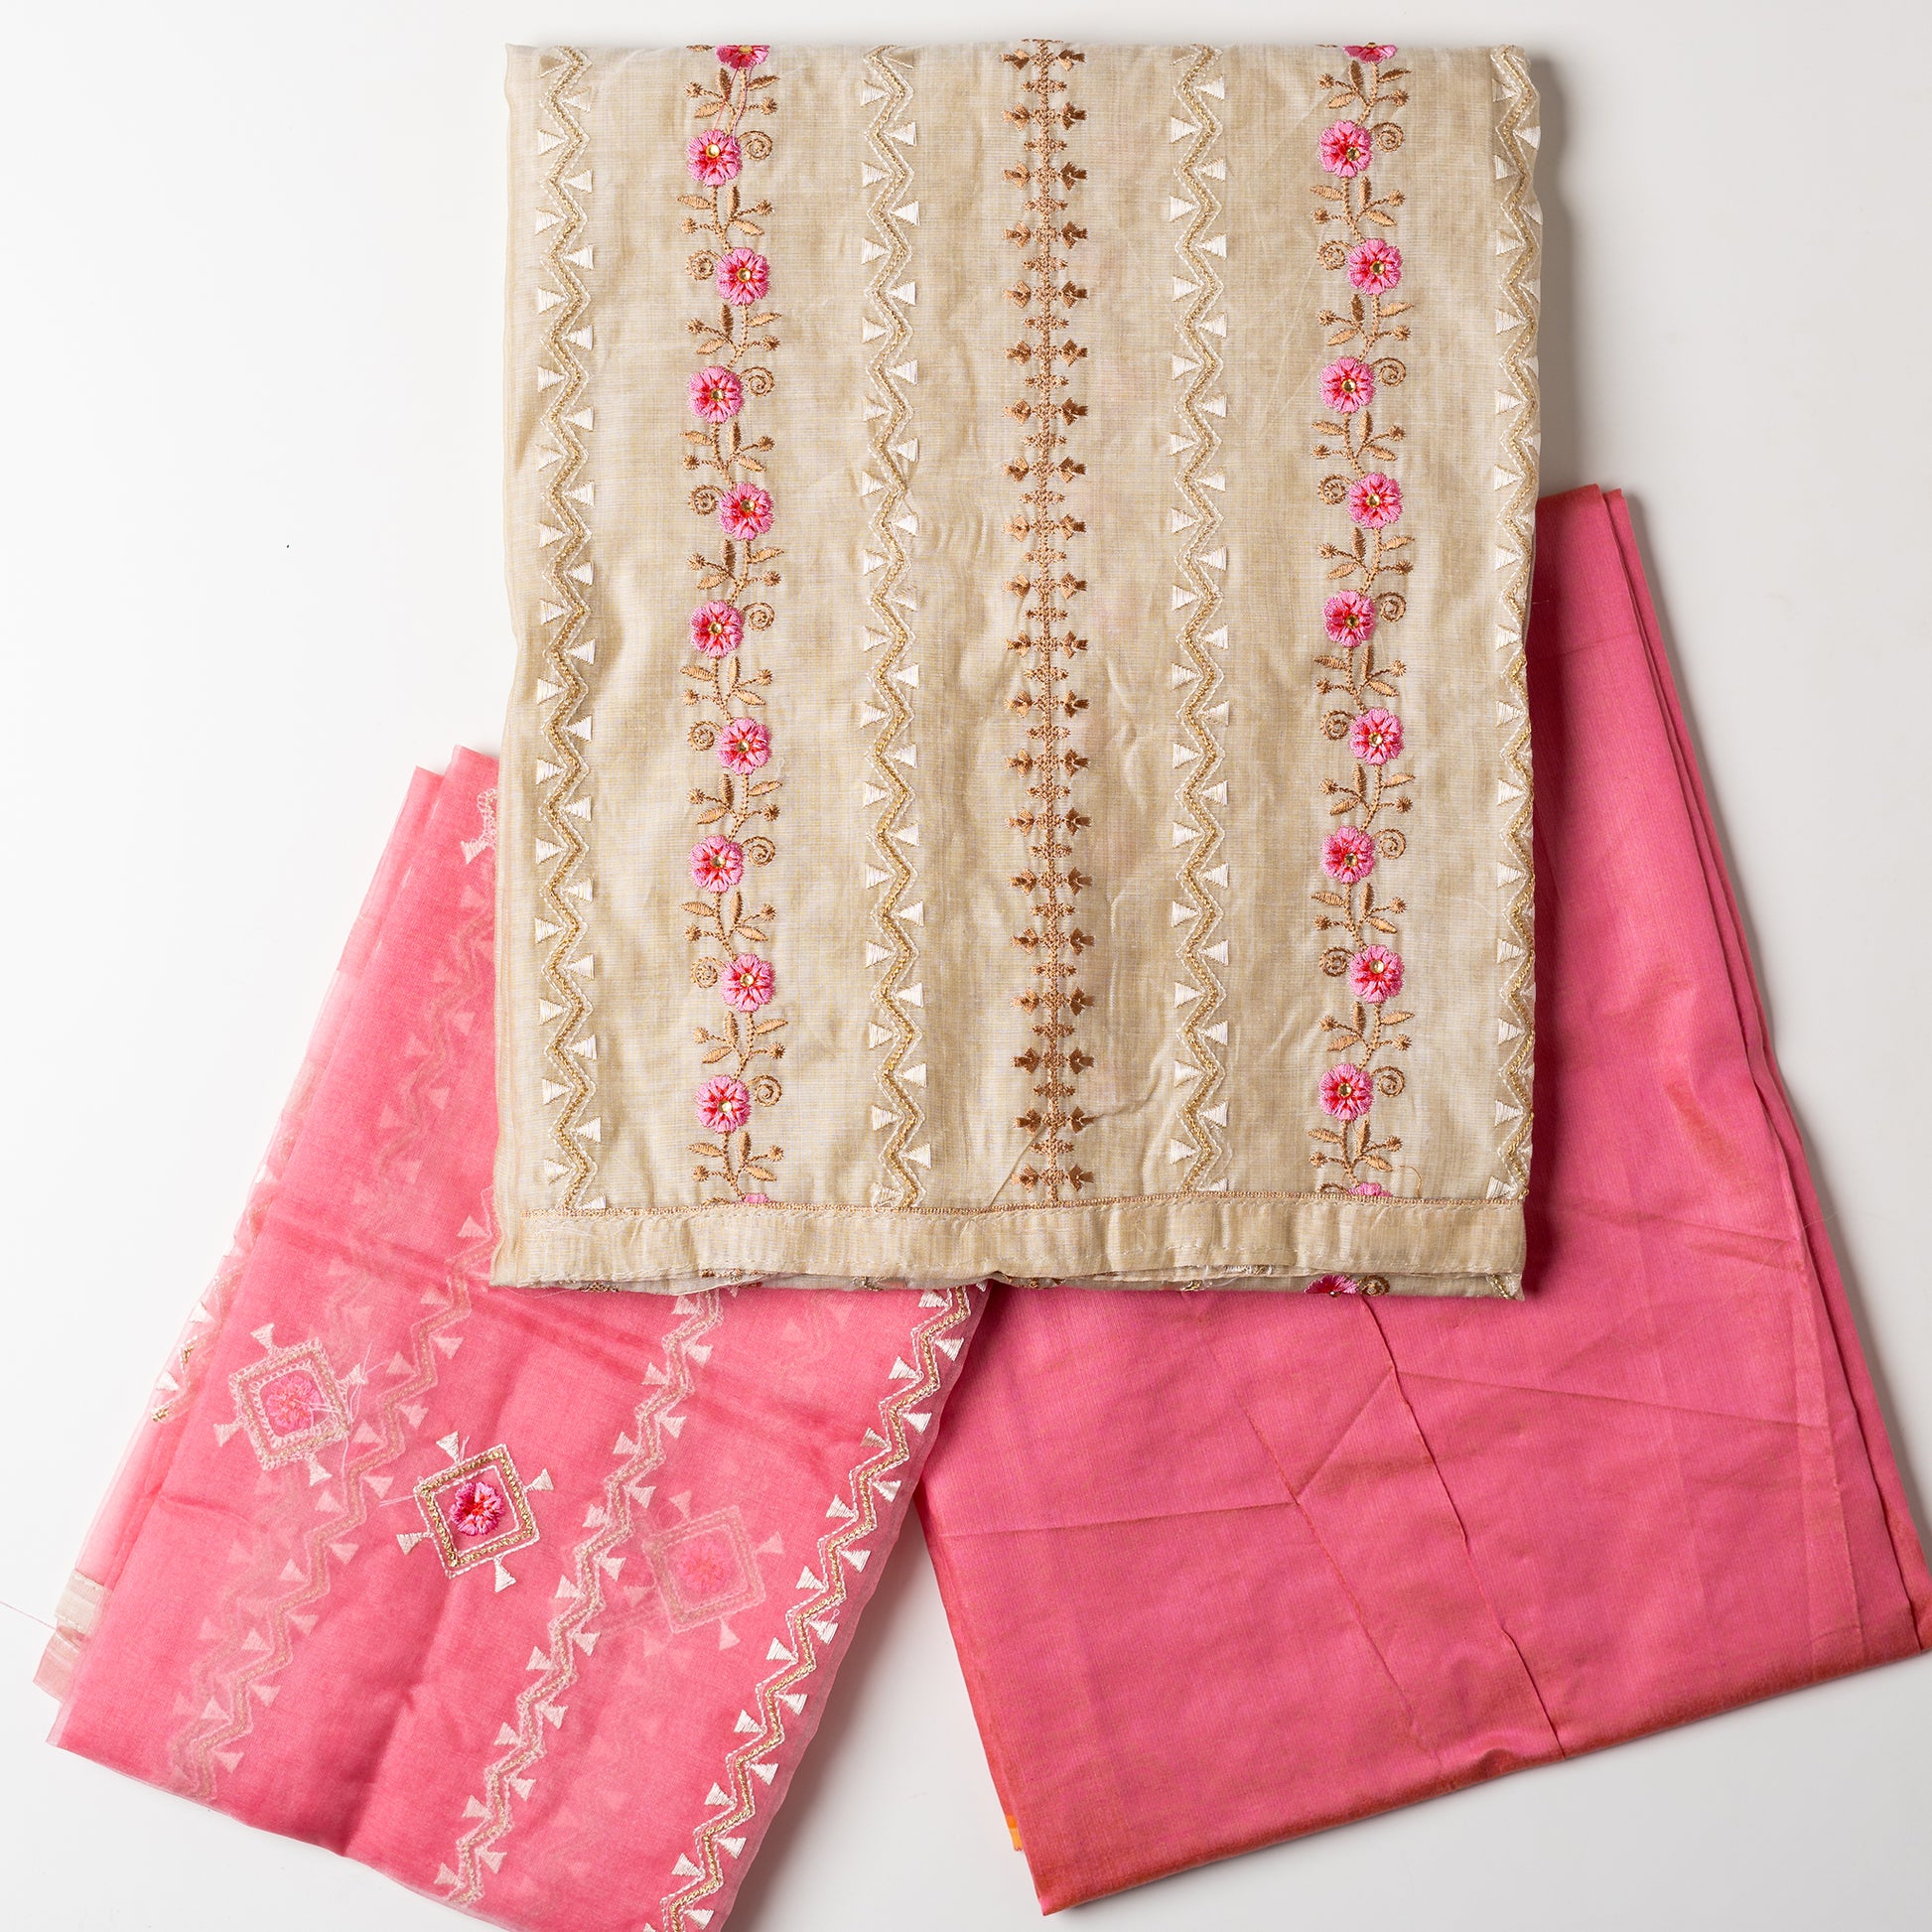 Unstitched Chanderi silk dress material with pink color embroidery work and zari thread work in between the embroidery. Cotton silk pink color bottom, Silk dupatta with embroidery work and zari thread work matching the top design